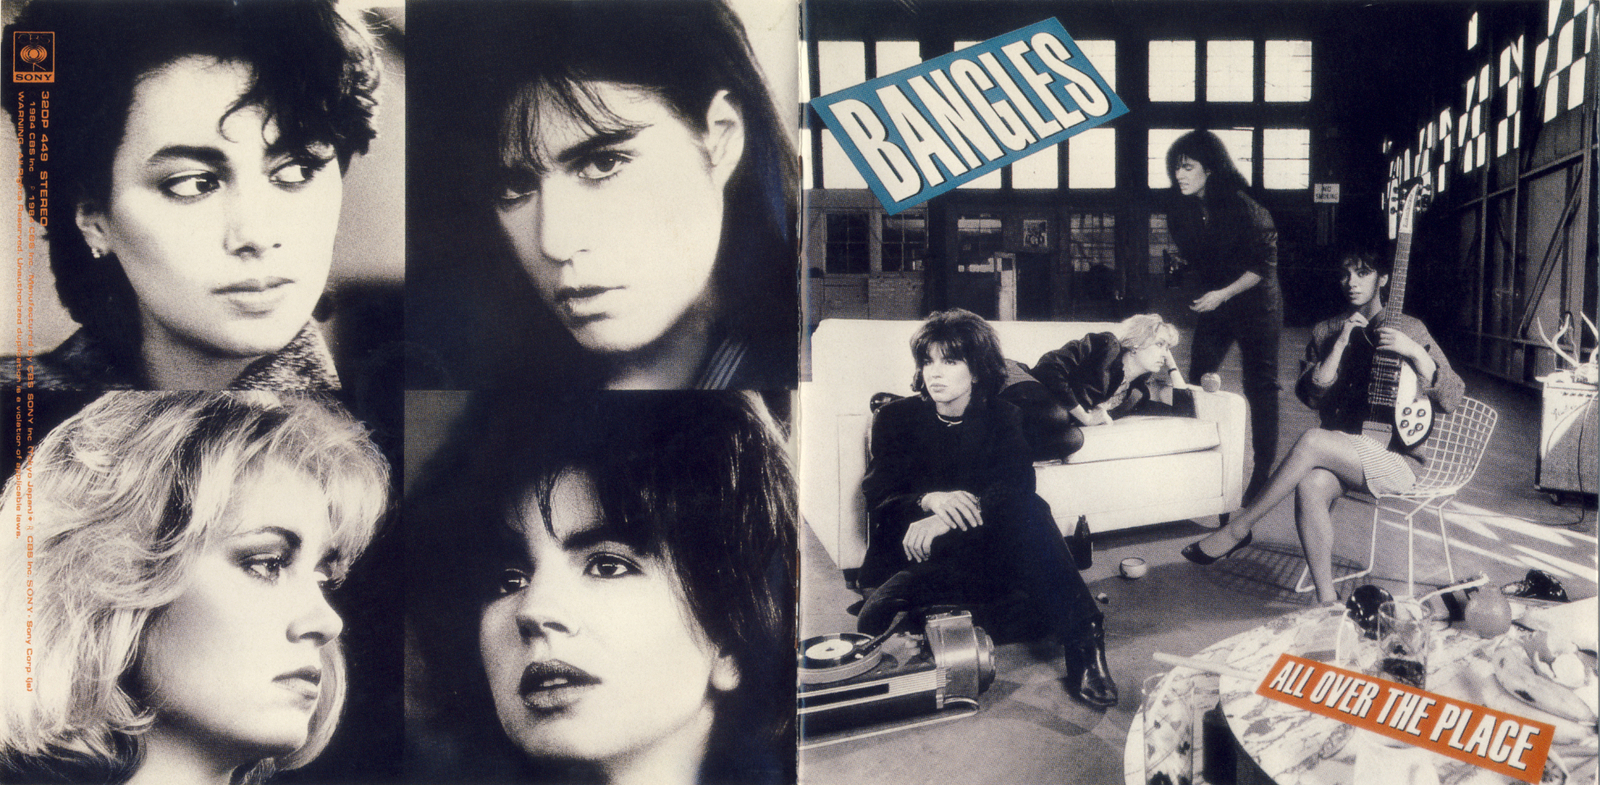 Bangles - All Over The Place - Cover-Back.jpg